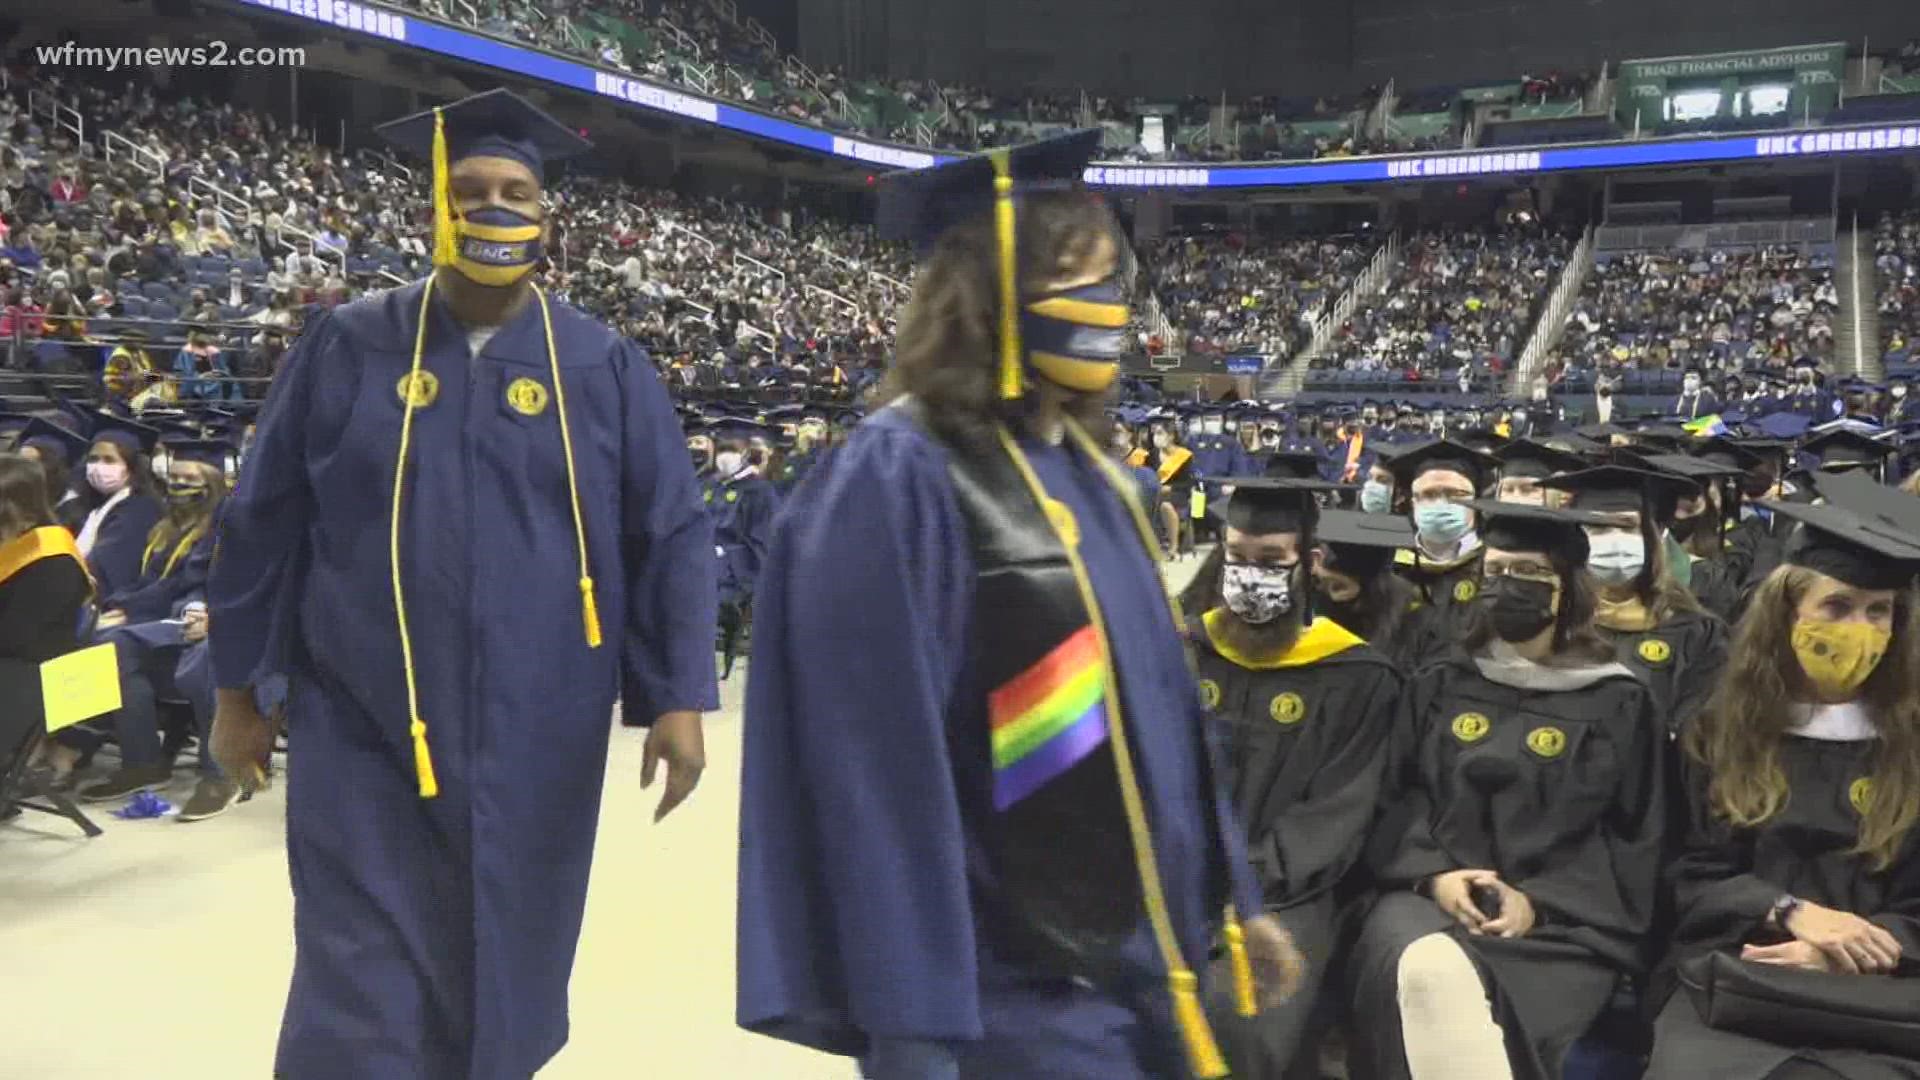 A couple who got married in 1995 walked the stage together at UNCG’s 2021 fall commencement ceremony.